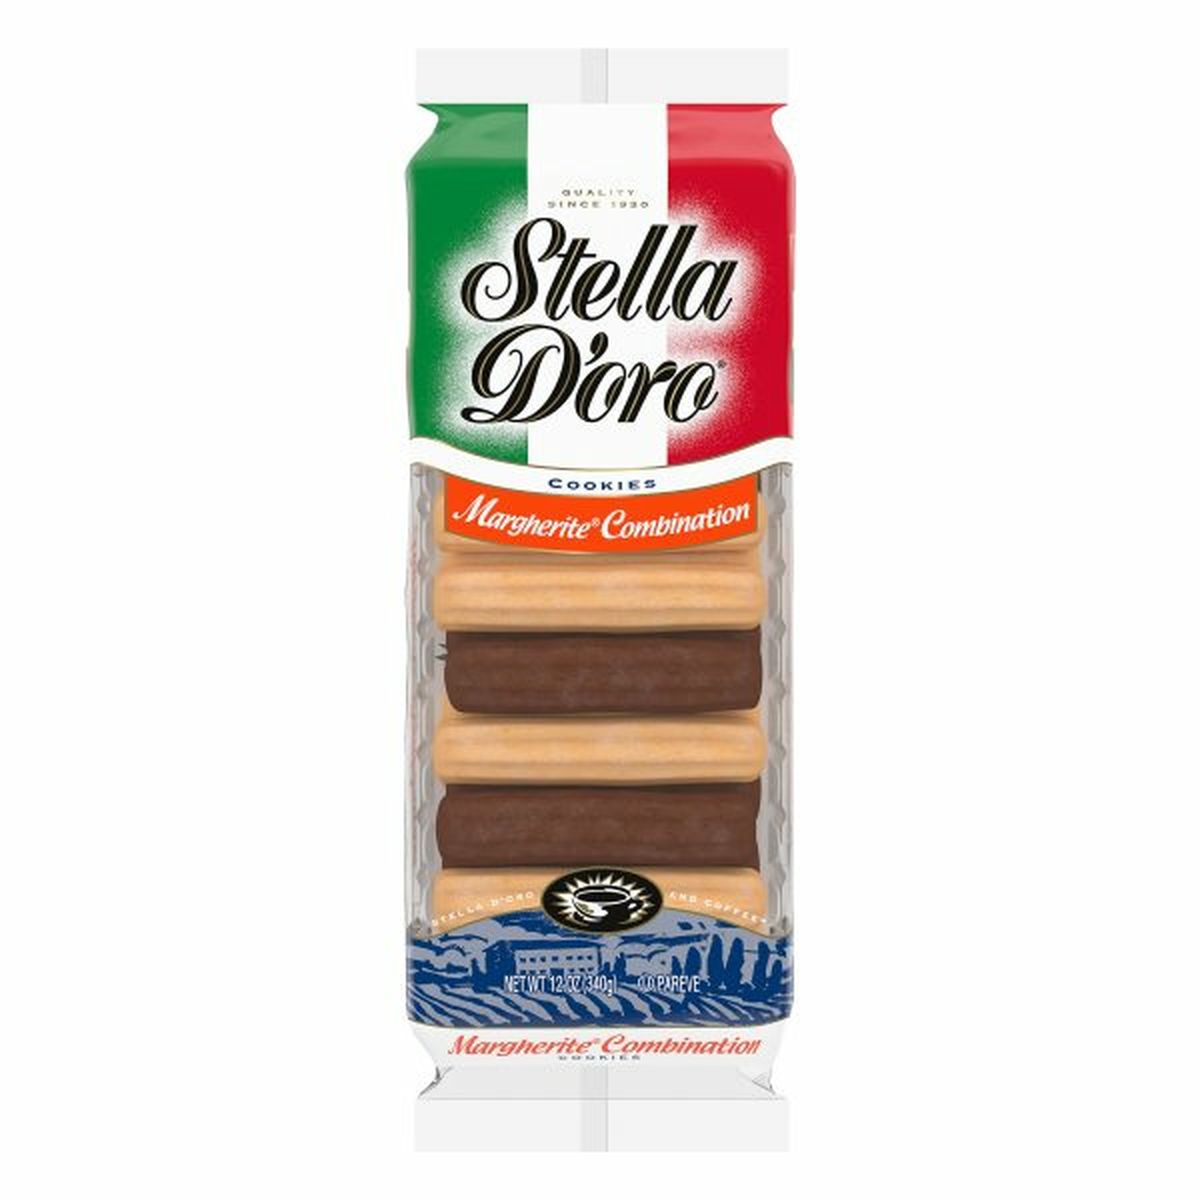 Calories in Stella D'oros Cookies, Margherite Combination